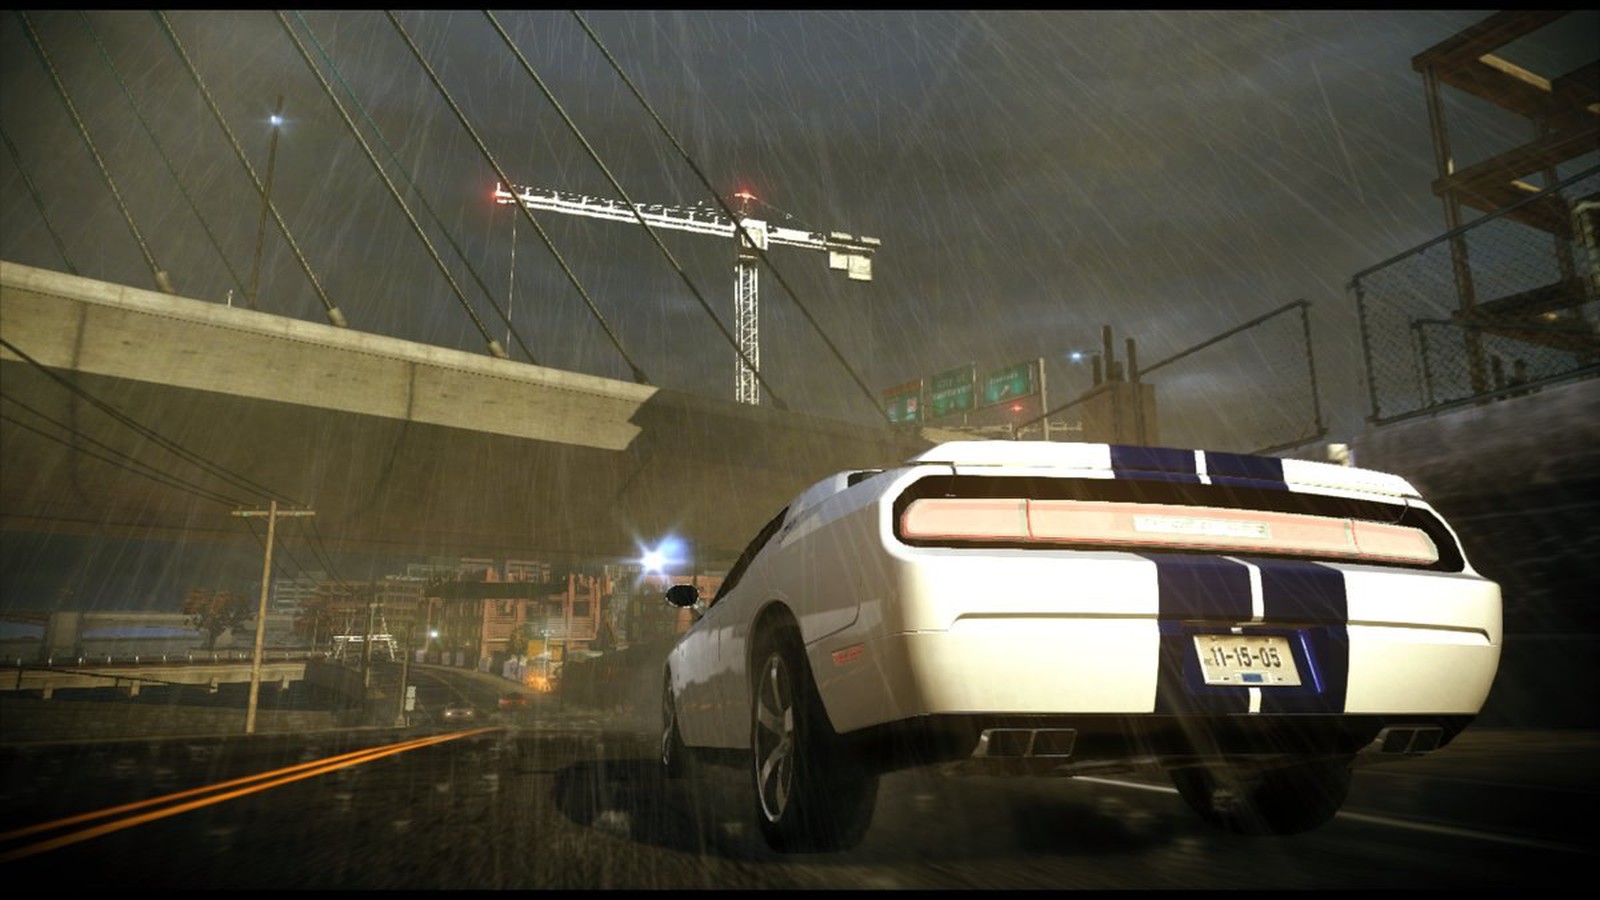 Nfs mw 2. NFS most wanted 2. NFS most wanted 2012 Beta. Need for Speed: most wanted/most wanted 2012. NFS MW 2012 Beta.